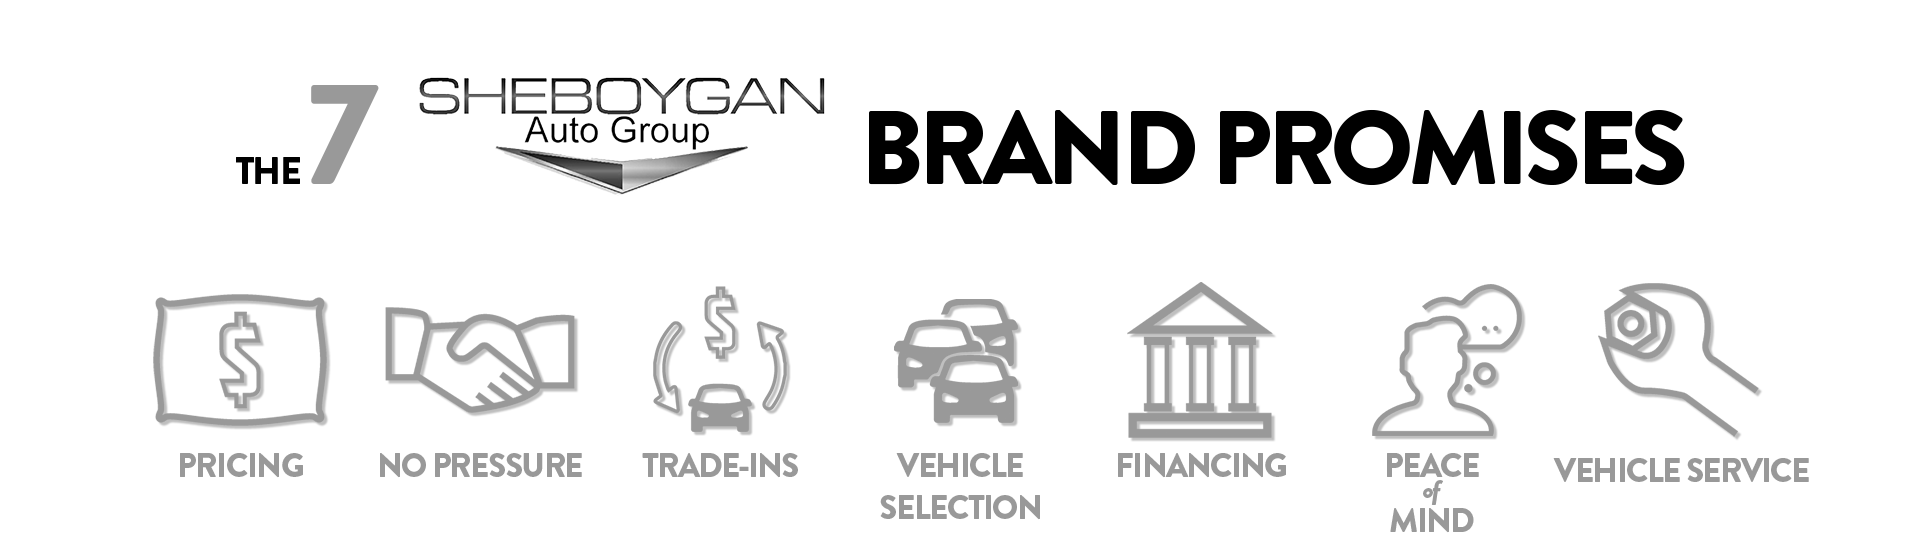 The 7 Sheboygan Auto Group Brand Promises: pricing, no pressure, trade-ins, vehicle selection, financing, peace of mind, vehicle service.